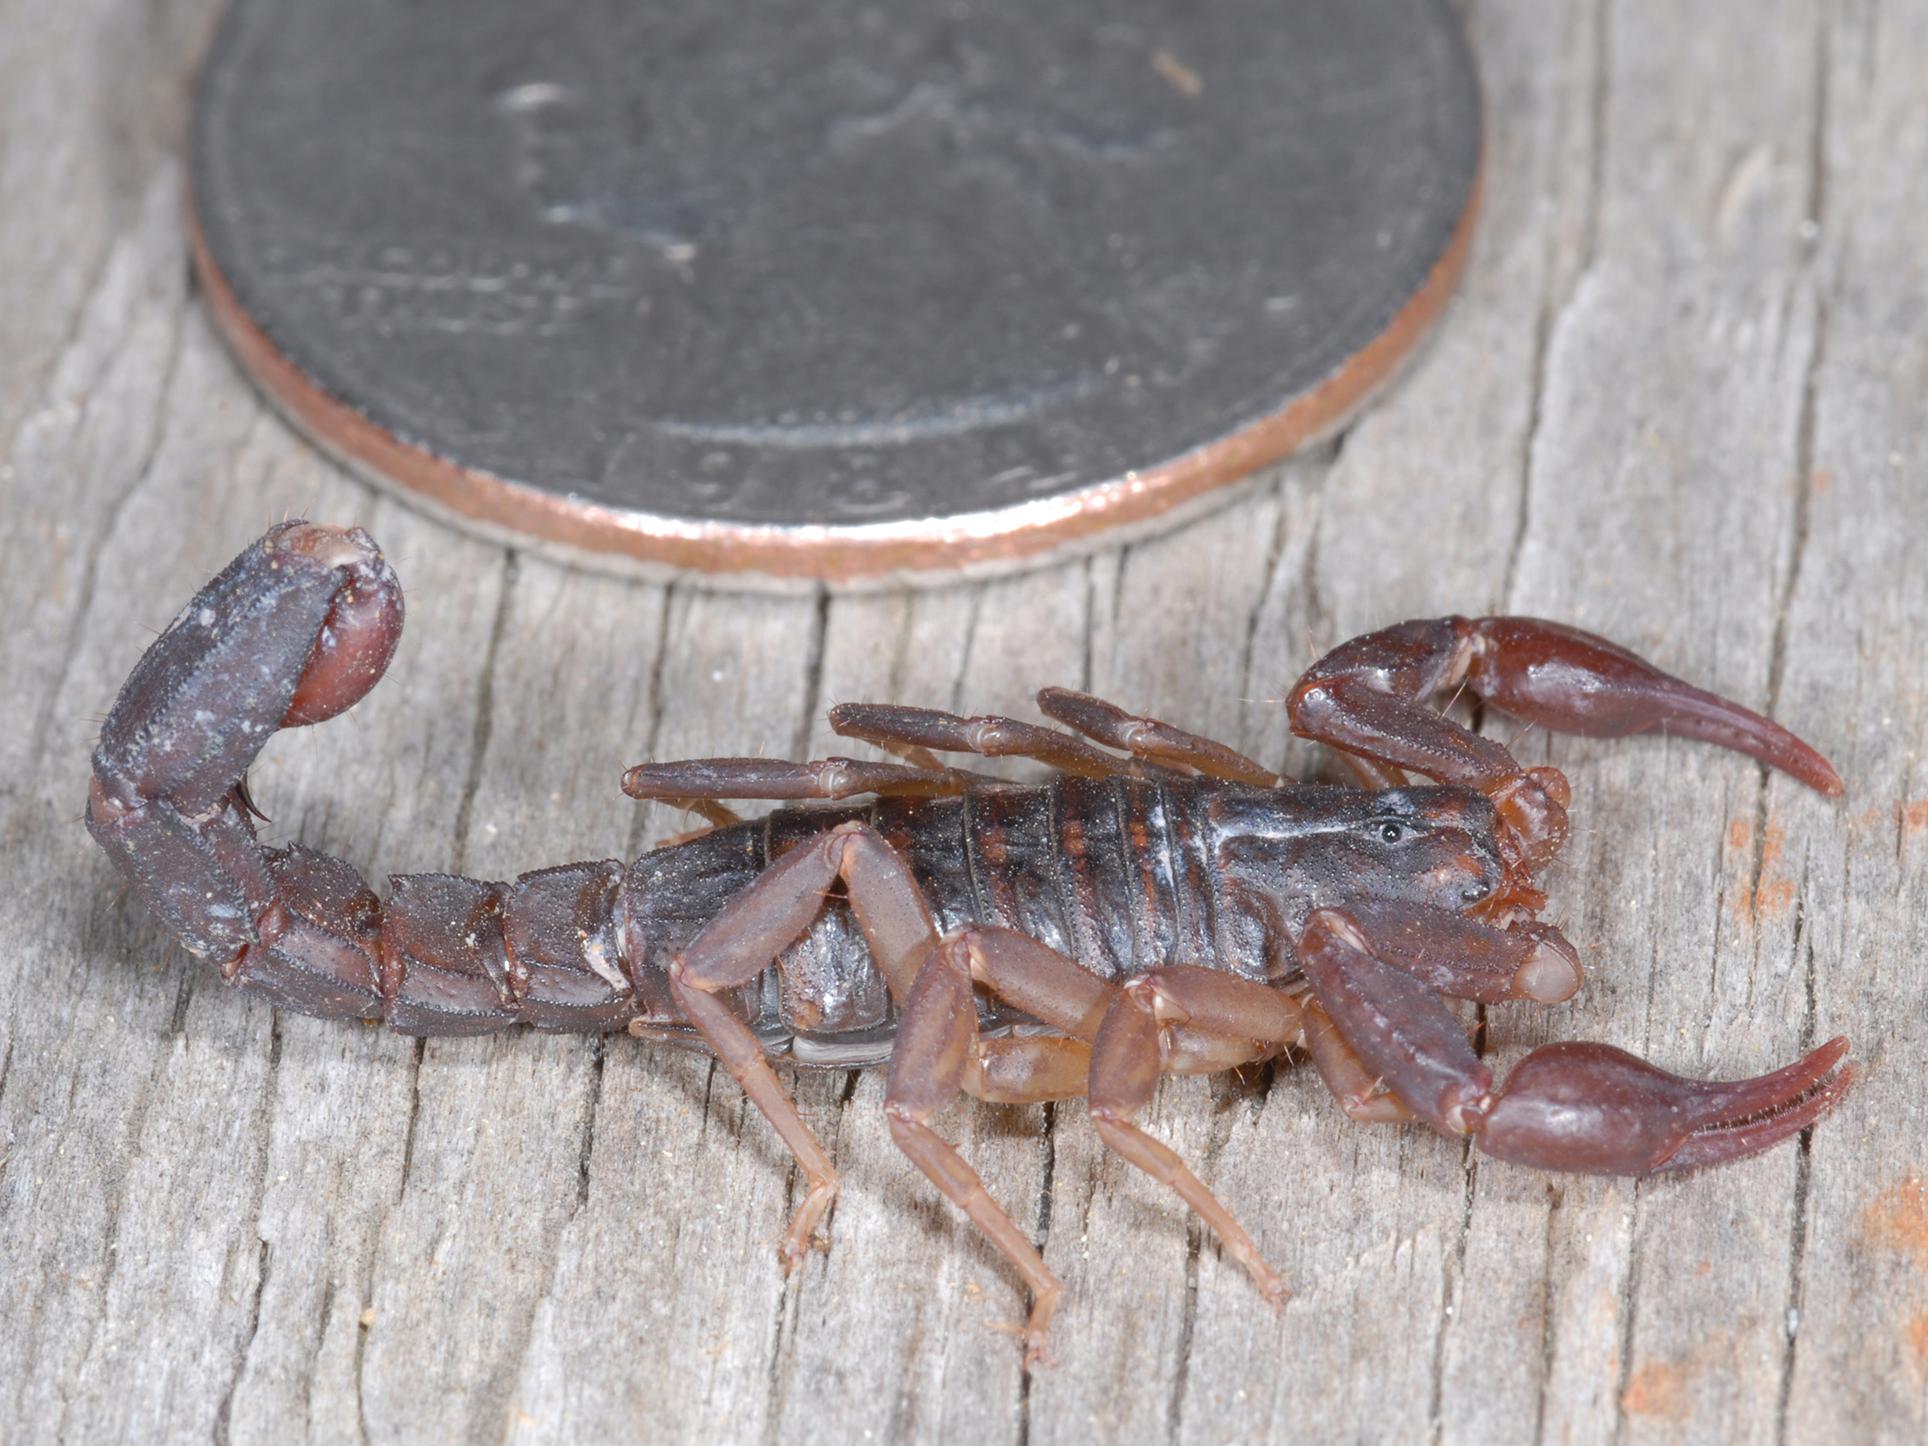 A small, brown scorpion with tail curled is pictured next to a quarter.